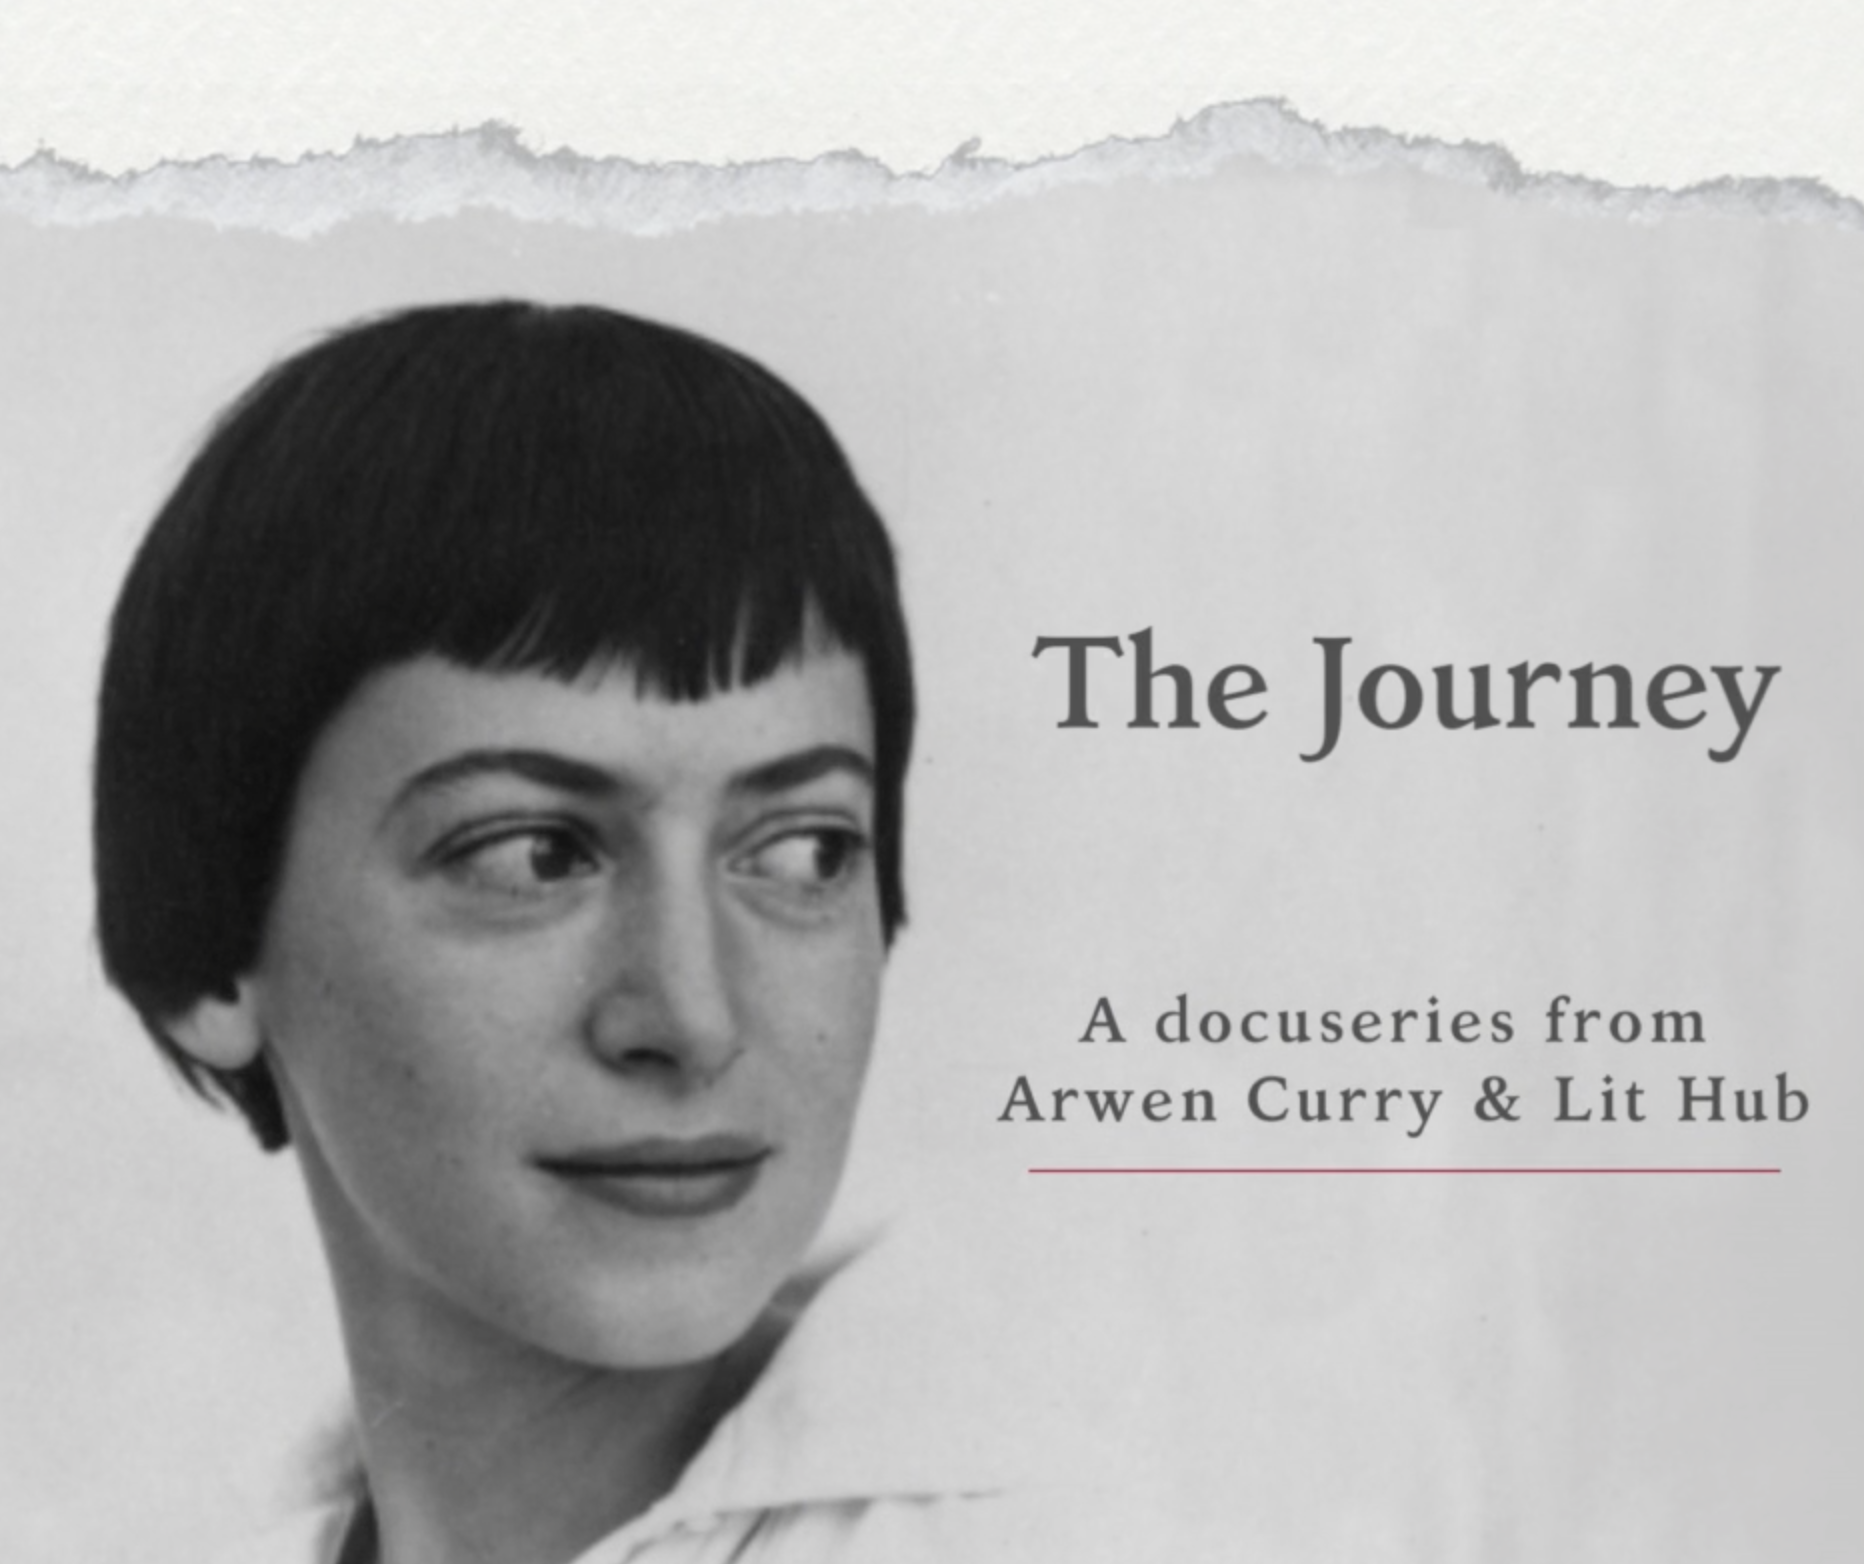 Worlds of Ursula K. Le Guin – Documentary Film by Arwen Curry